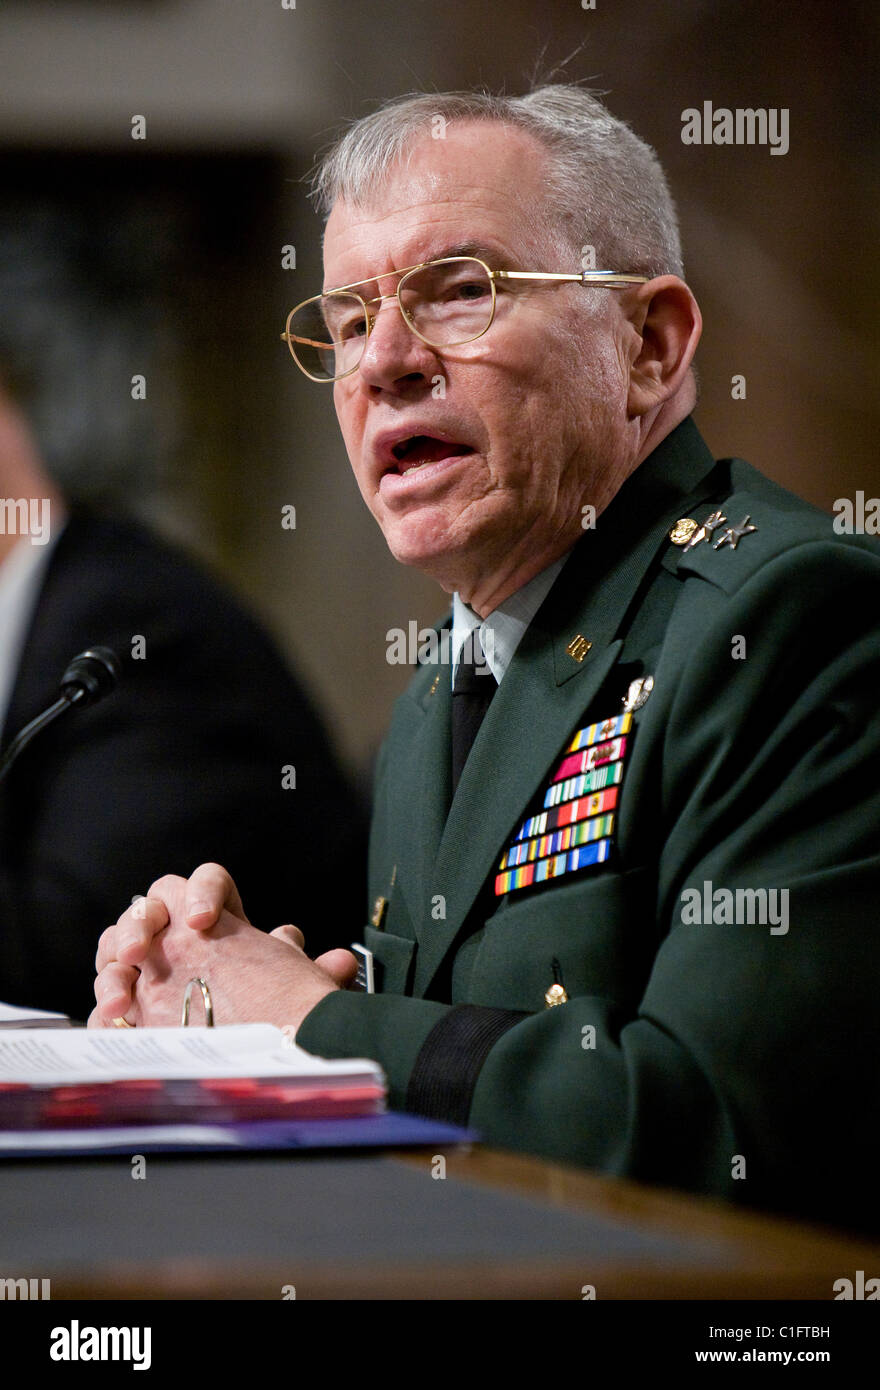 General Ronald L. Burgess, Jr., Director of the Defense Intelligence Agency (DIA) Stock Photo